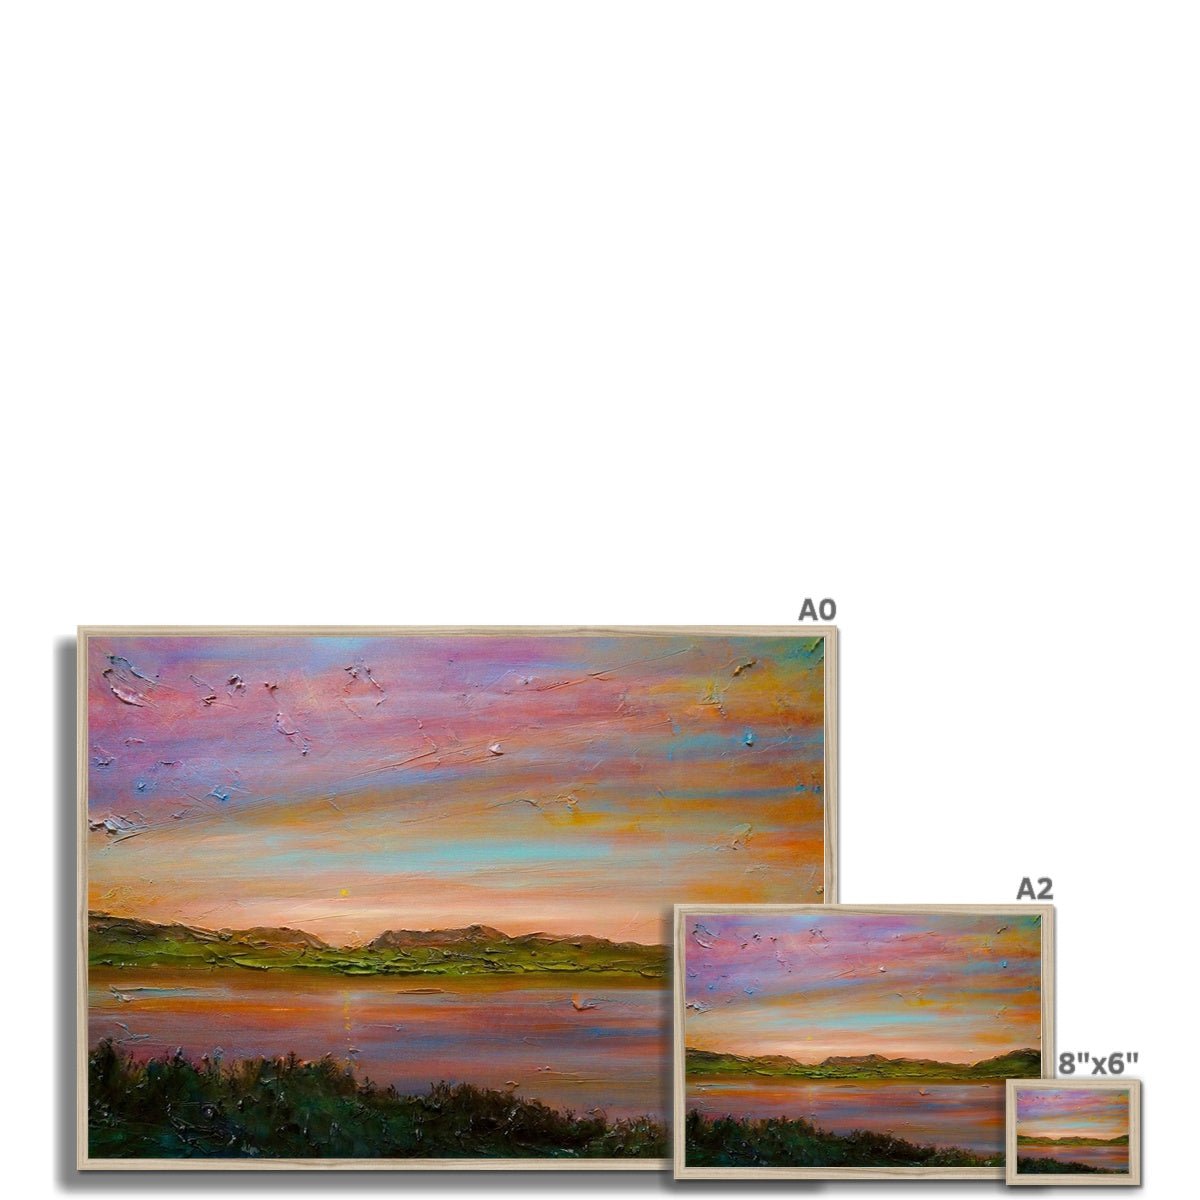 Gourock Golf Club Sunset Painting | Framed Prints From Scotland-Framed Prints-River Clyde Art Gallery-Paintings, Prints, Homeware, Art Gifts From Scotland By Scottish Artist Kevin Hunter